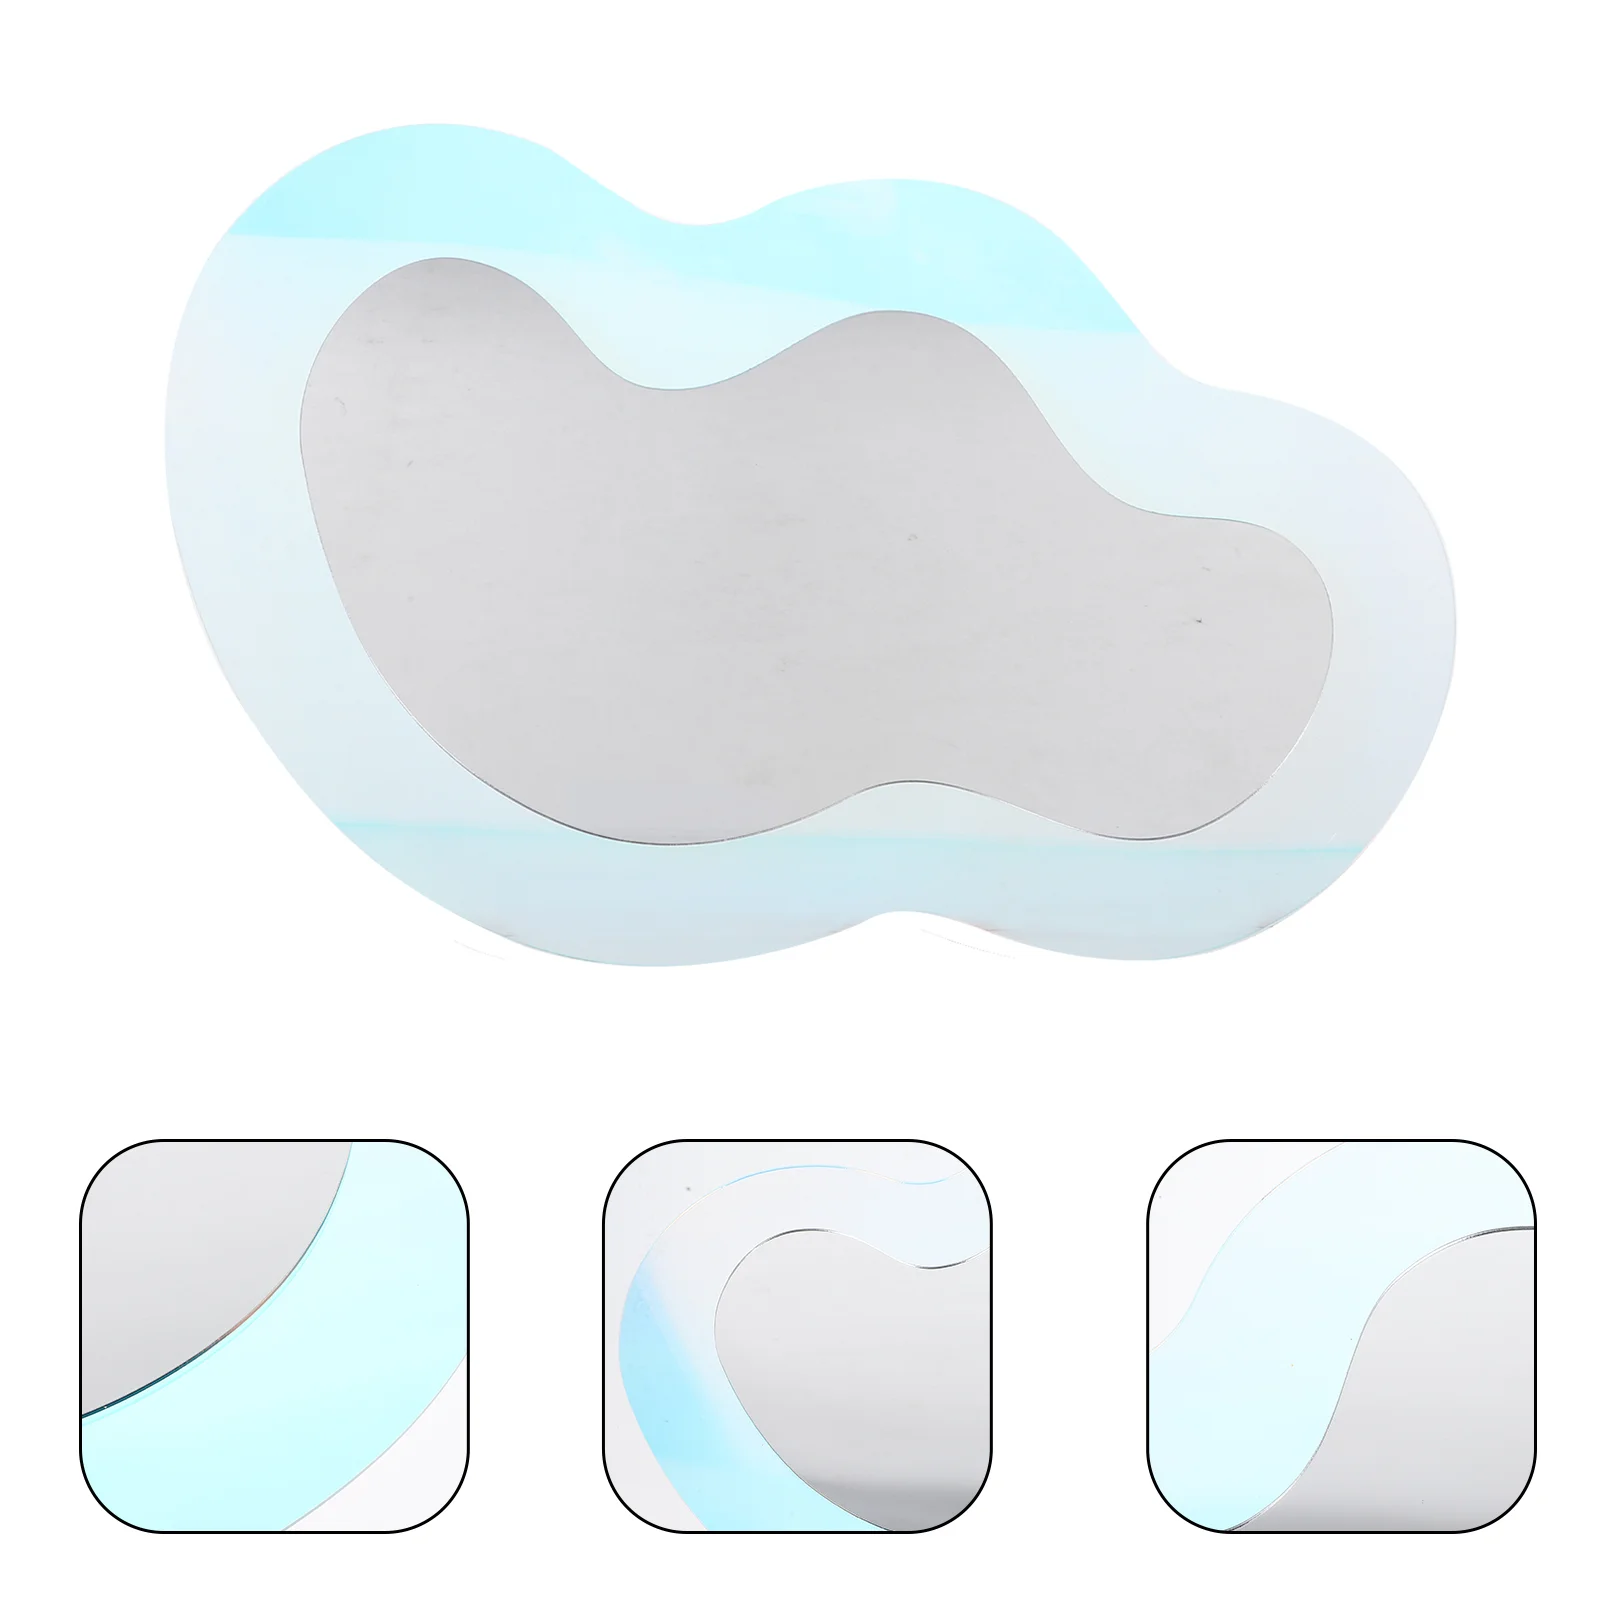 

Mirror Panels Home Decor Living Room Wall Acrylic Cloud Shaped For Bedroom Symphony